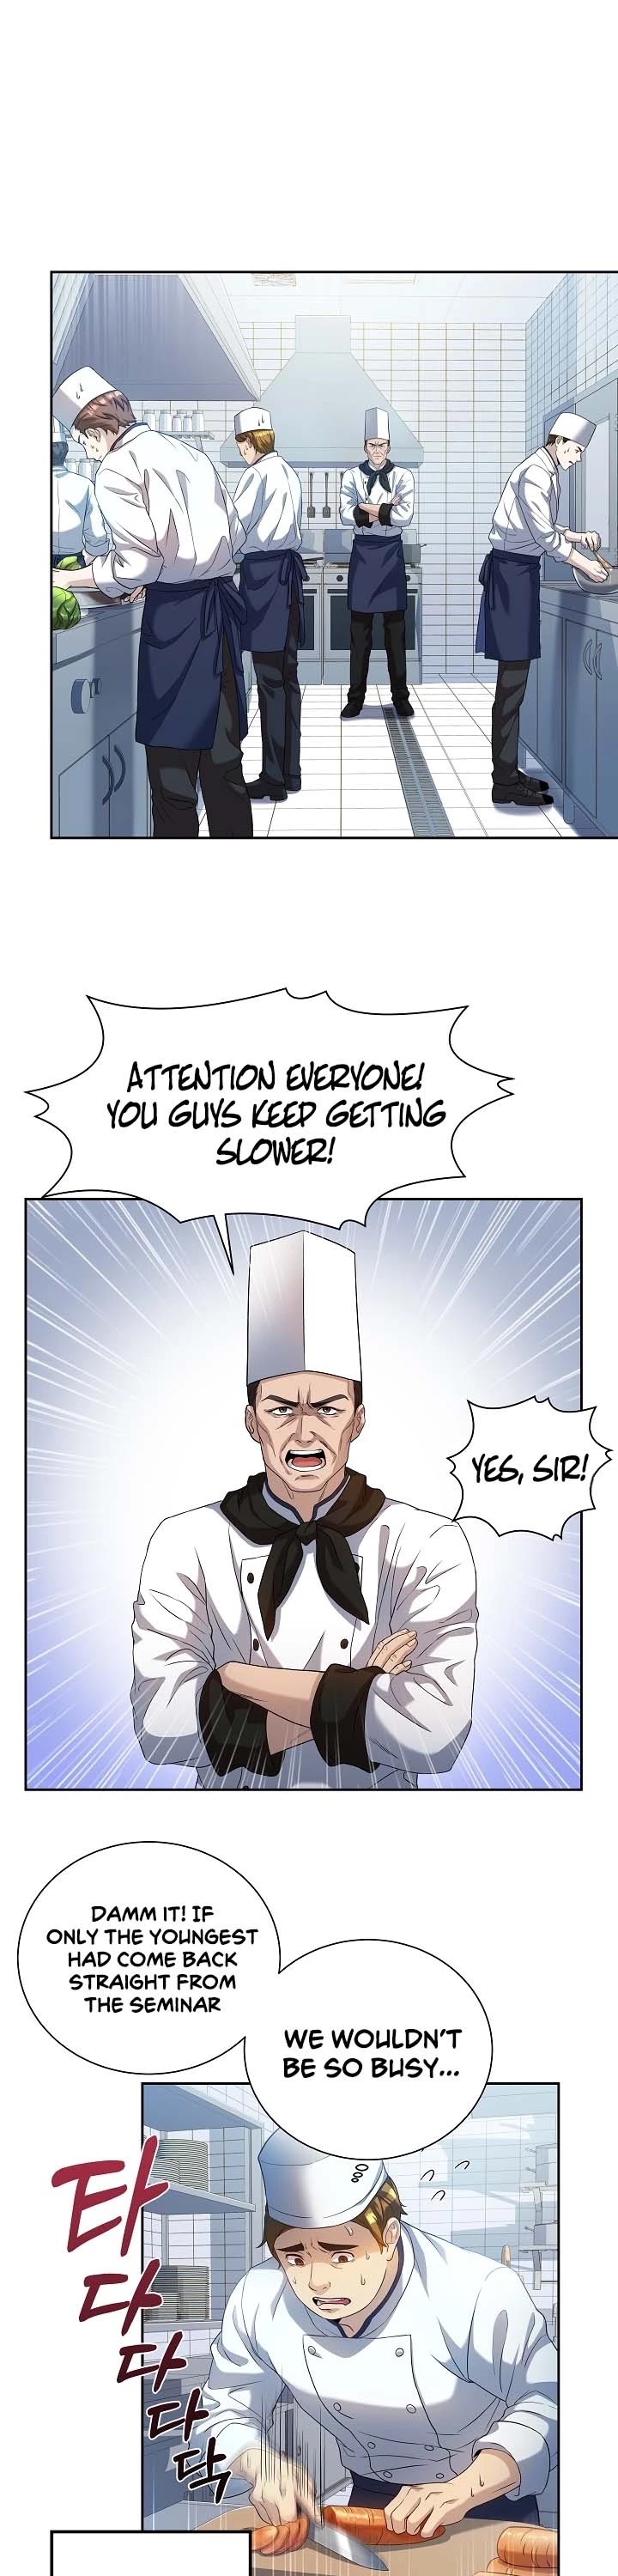 Youngest Chef From The 3Rd Rate Hotel - Page 3